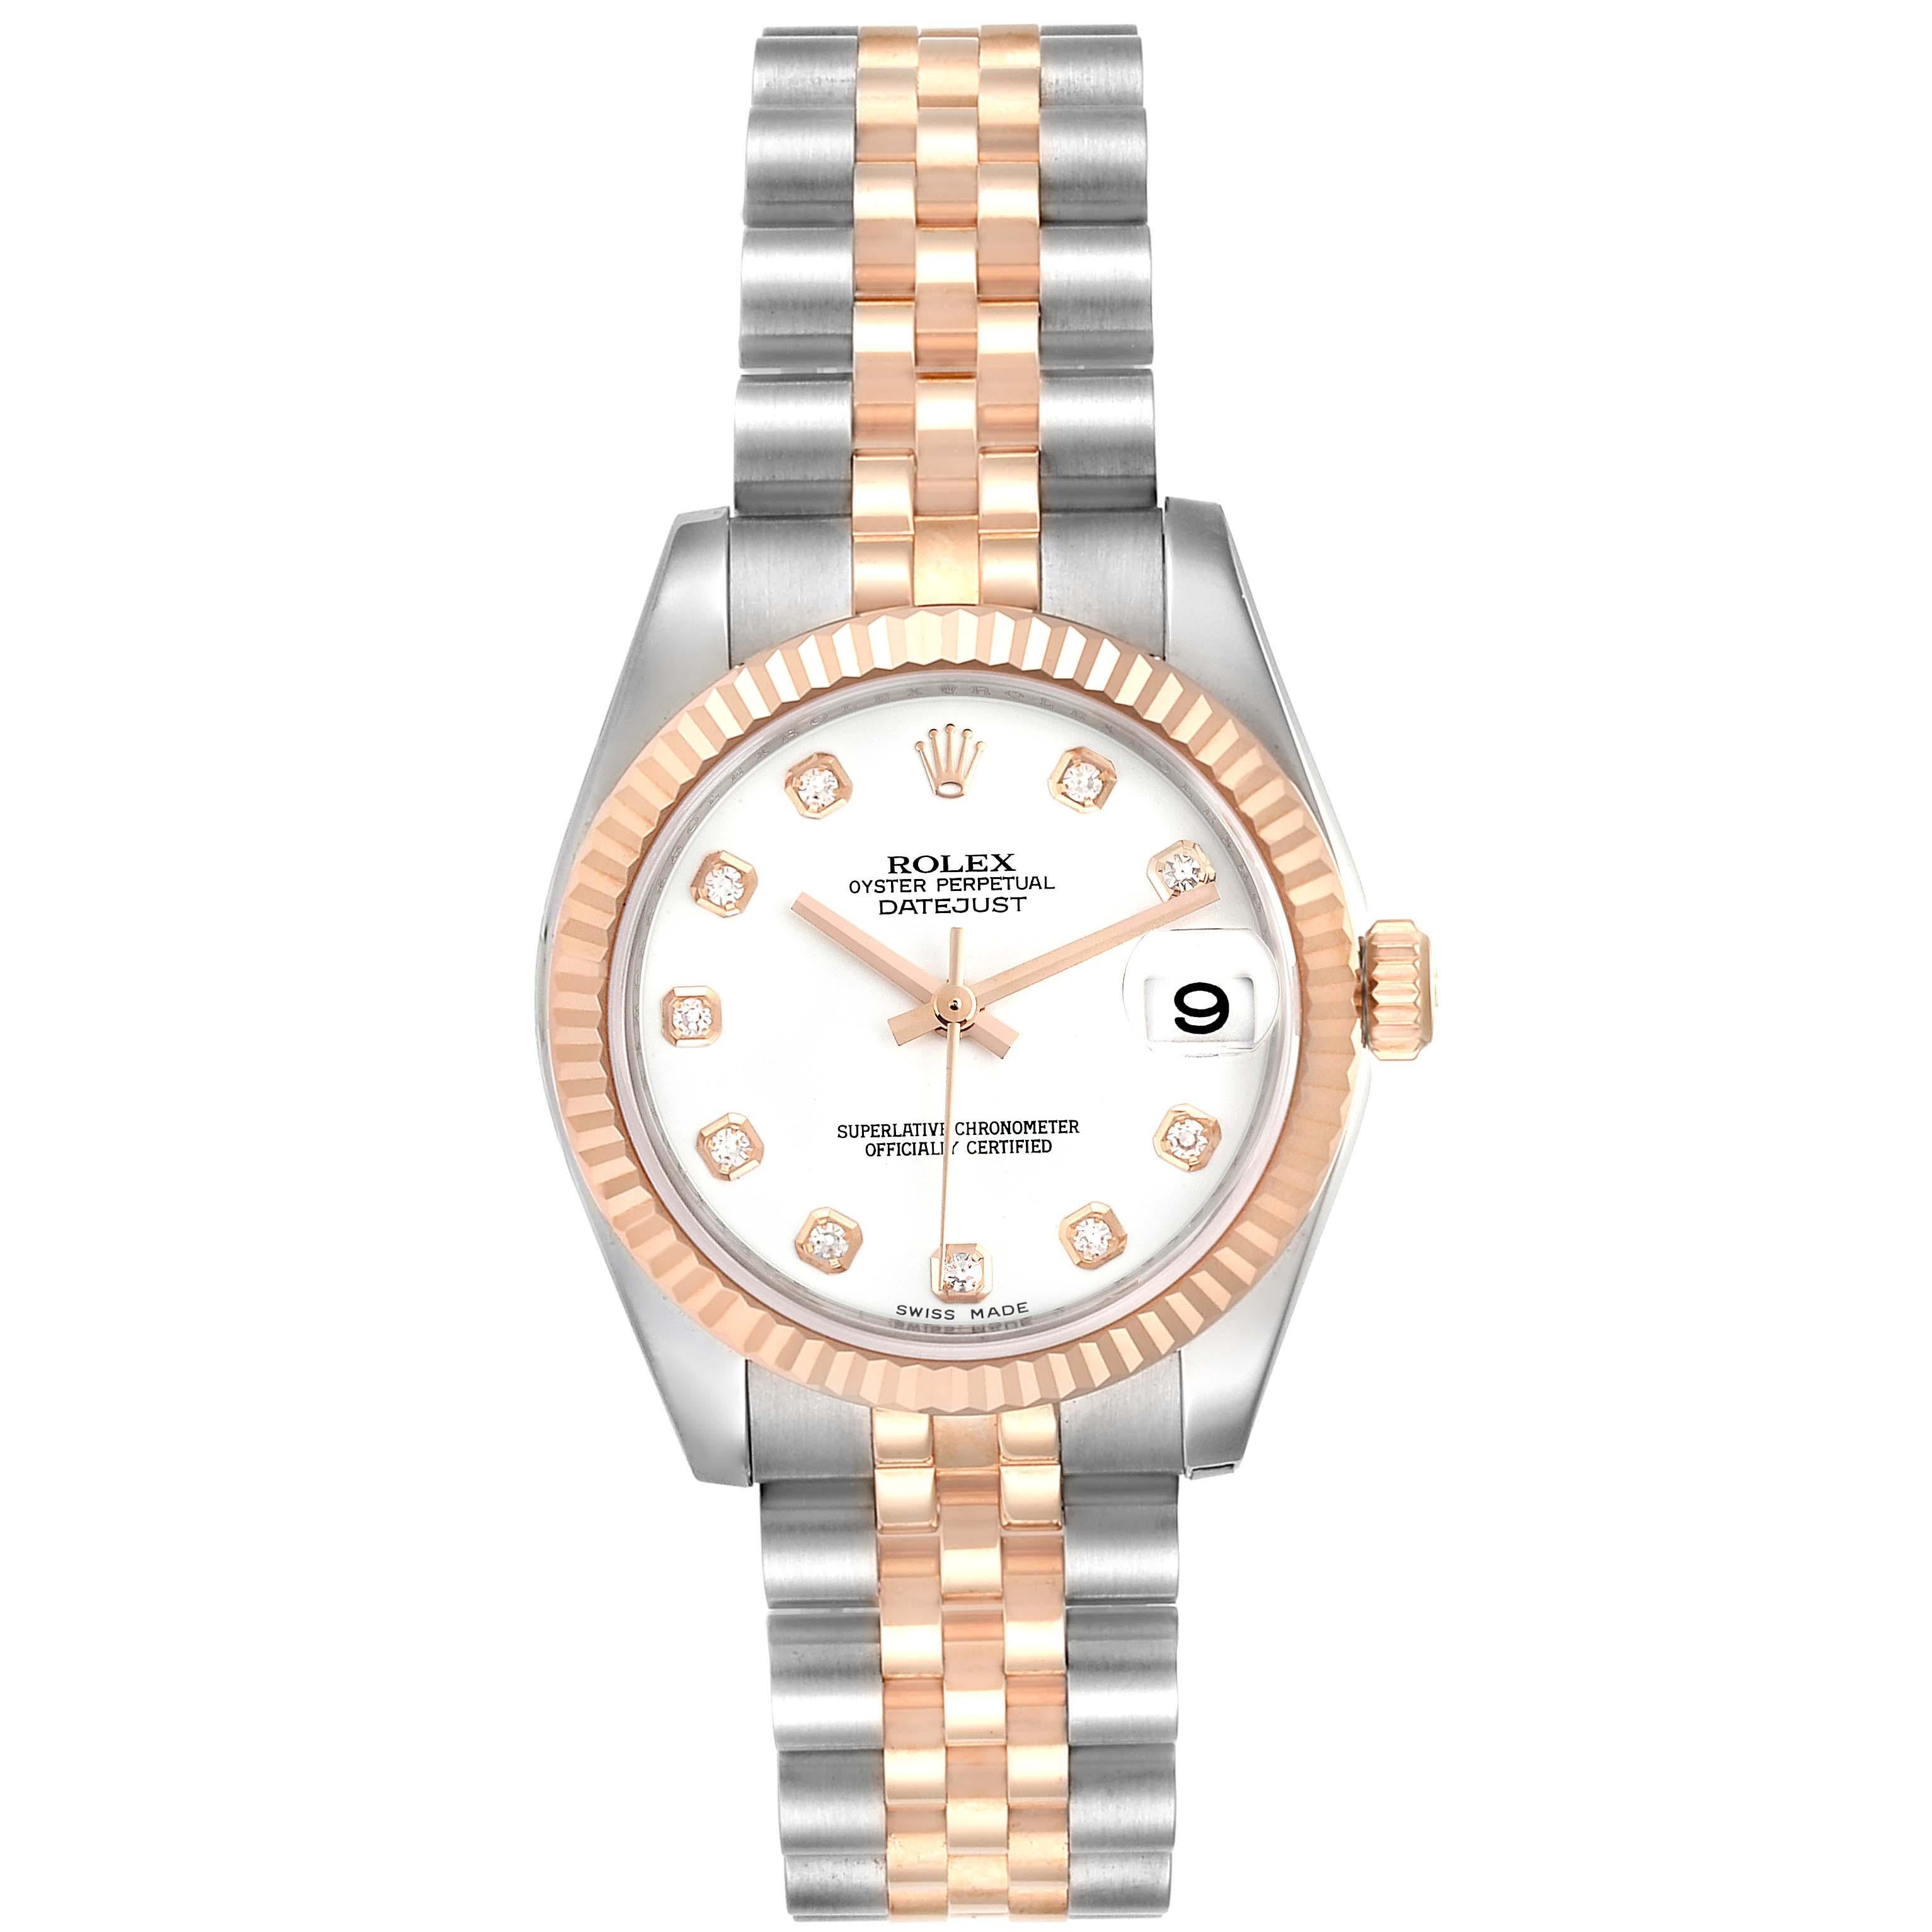 Rolex Datejust 31 Midsize Steel Rose Gold Diamond Ladies Watch 178271. Officially certified chronometer self-winding movement. Stainless steel oyster case 31 mm in diameter. Rolex logo on 18K rose gold crown. 18k rose gold fluted bezel. Scratch